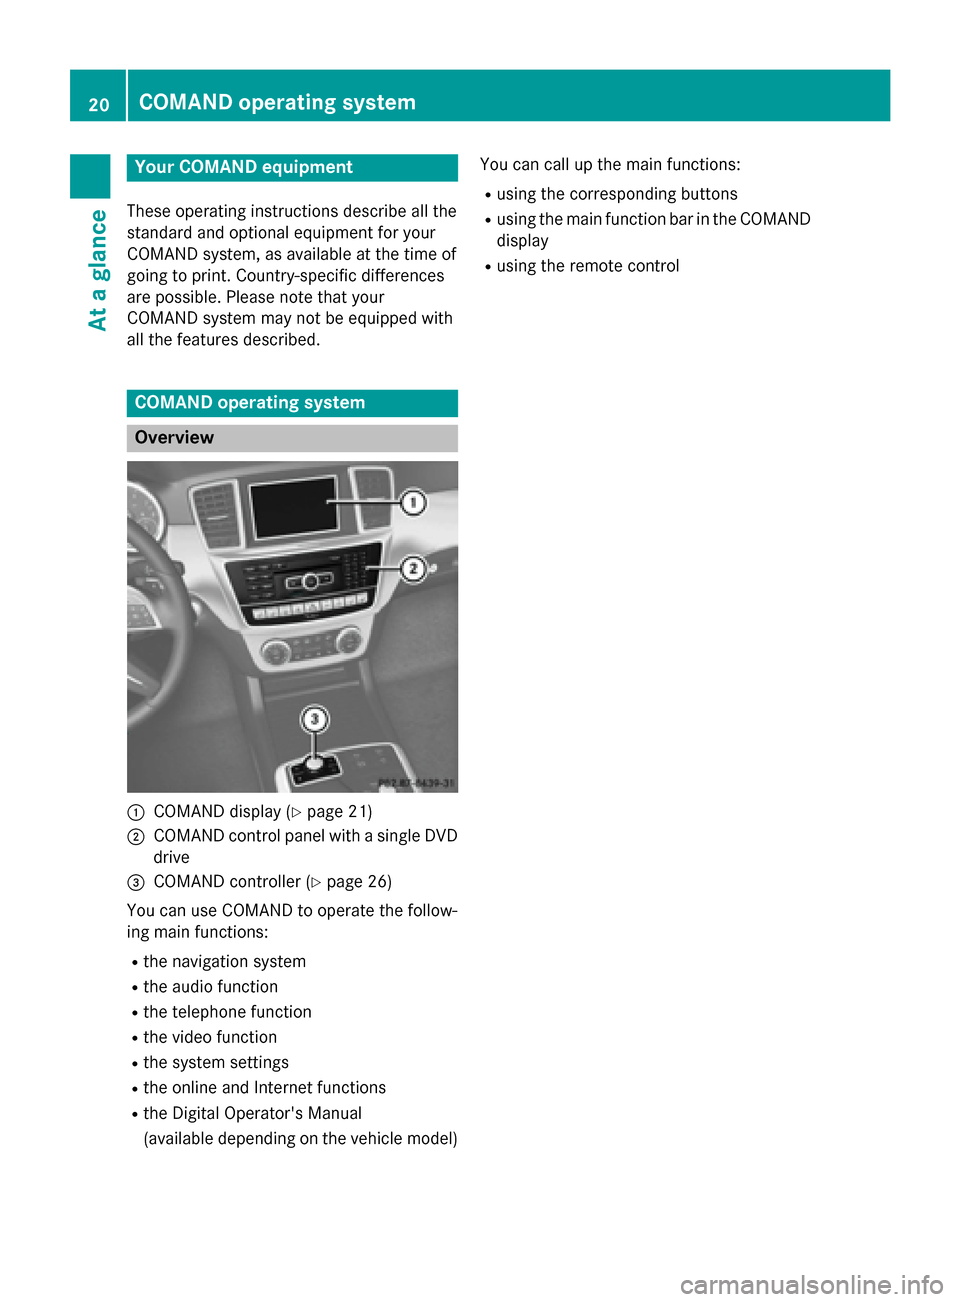 MERCEDES-BENZ CLA-Class 2014 C117 Comand Manual Your COMAND equipment
These operating instructions describe all the
standard and optional equipment for your
COMAND system, as available at the time of
going to print. Country-specific differences
are